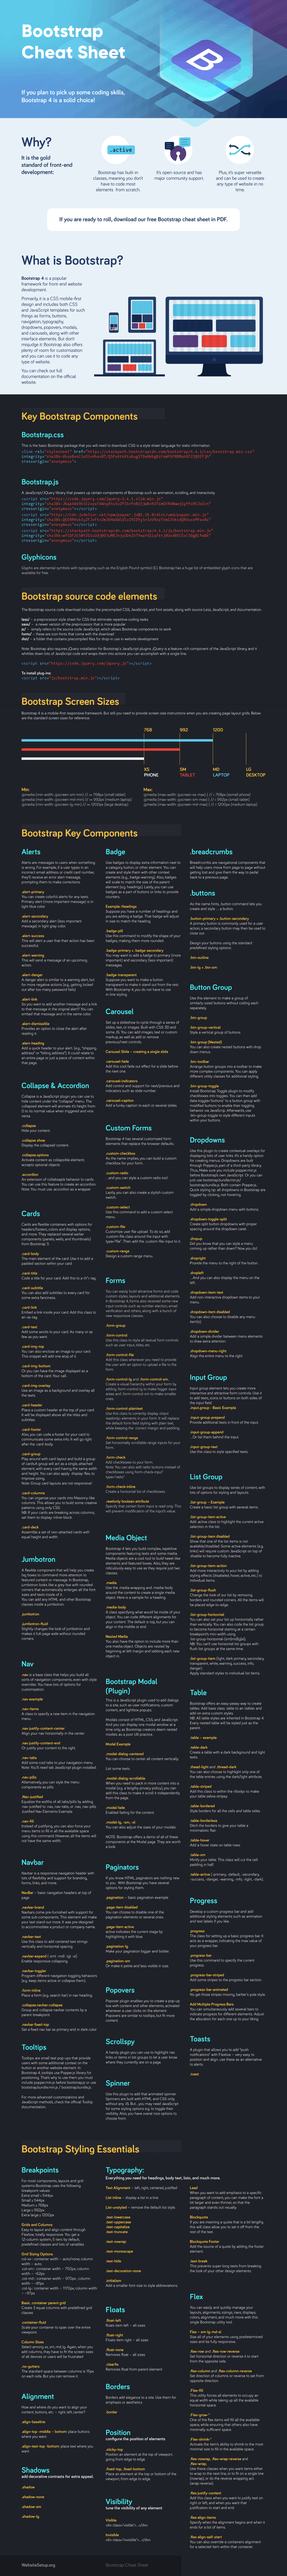 Bootstrap-Cheat-Sheet-Summary-Full.png